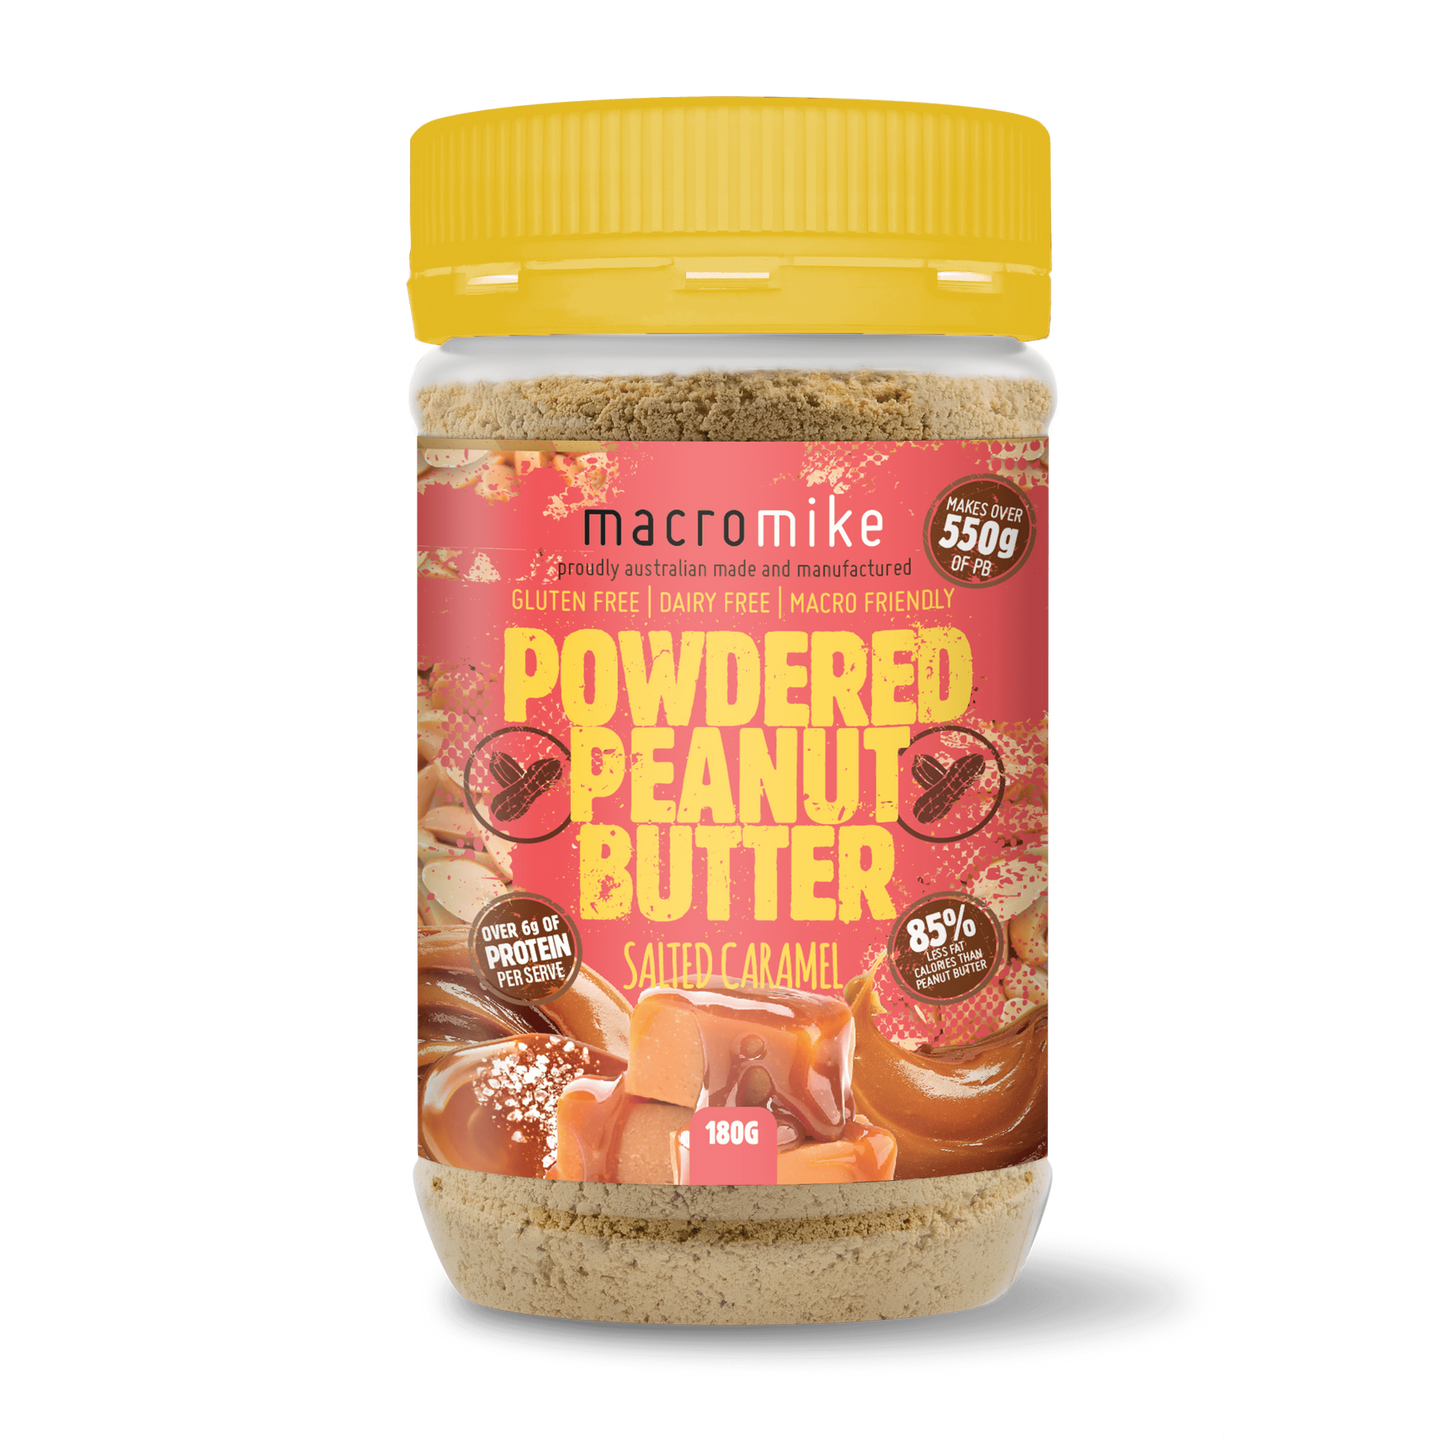 Macro Mike Powdered Peanut Butter 180g, Salted Caramel Flavour